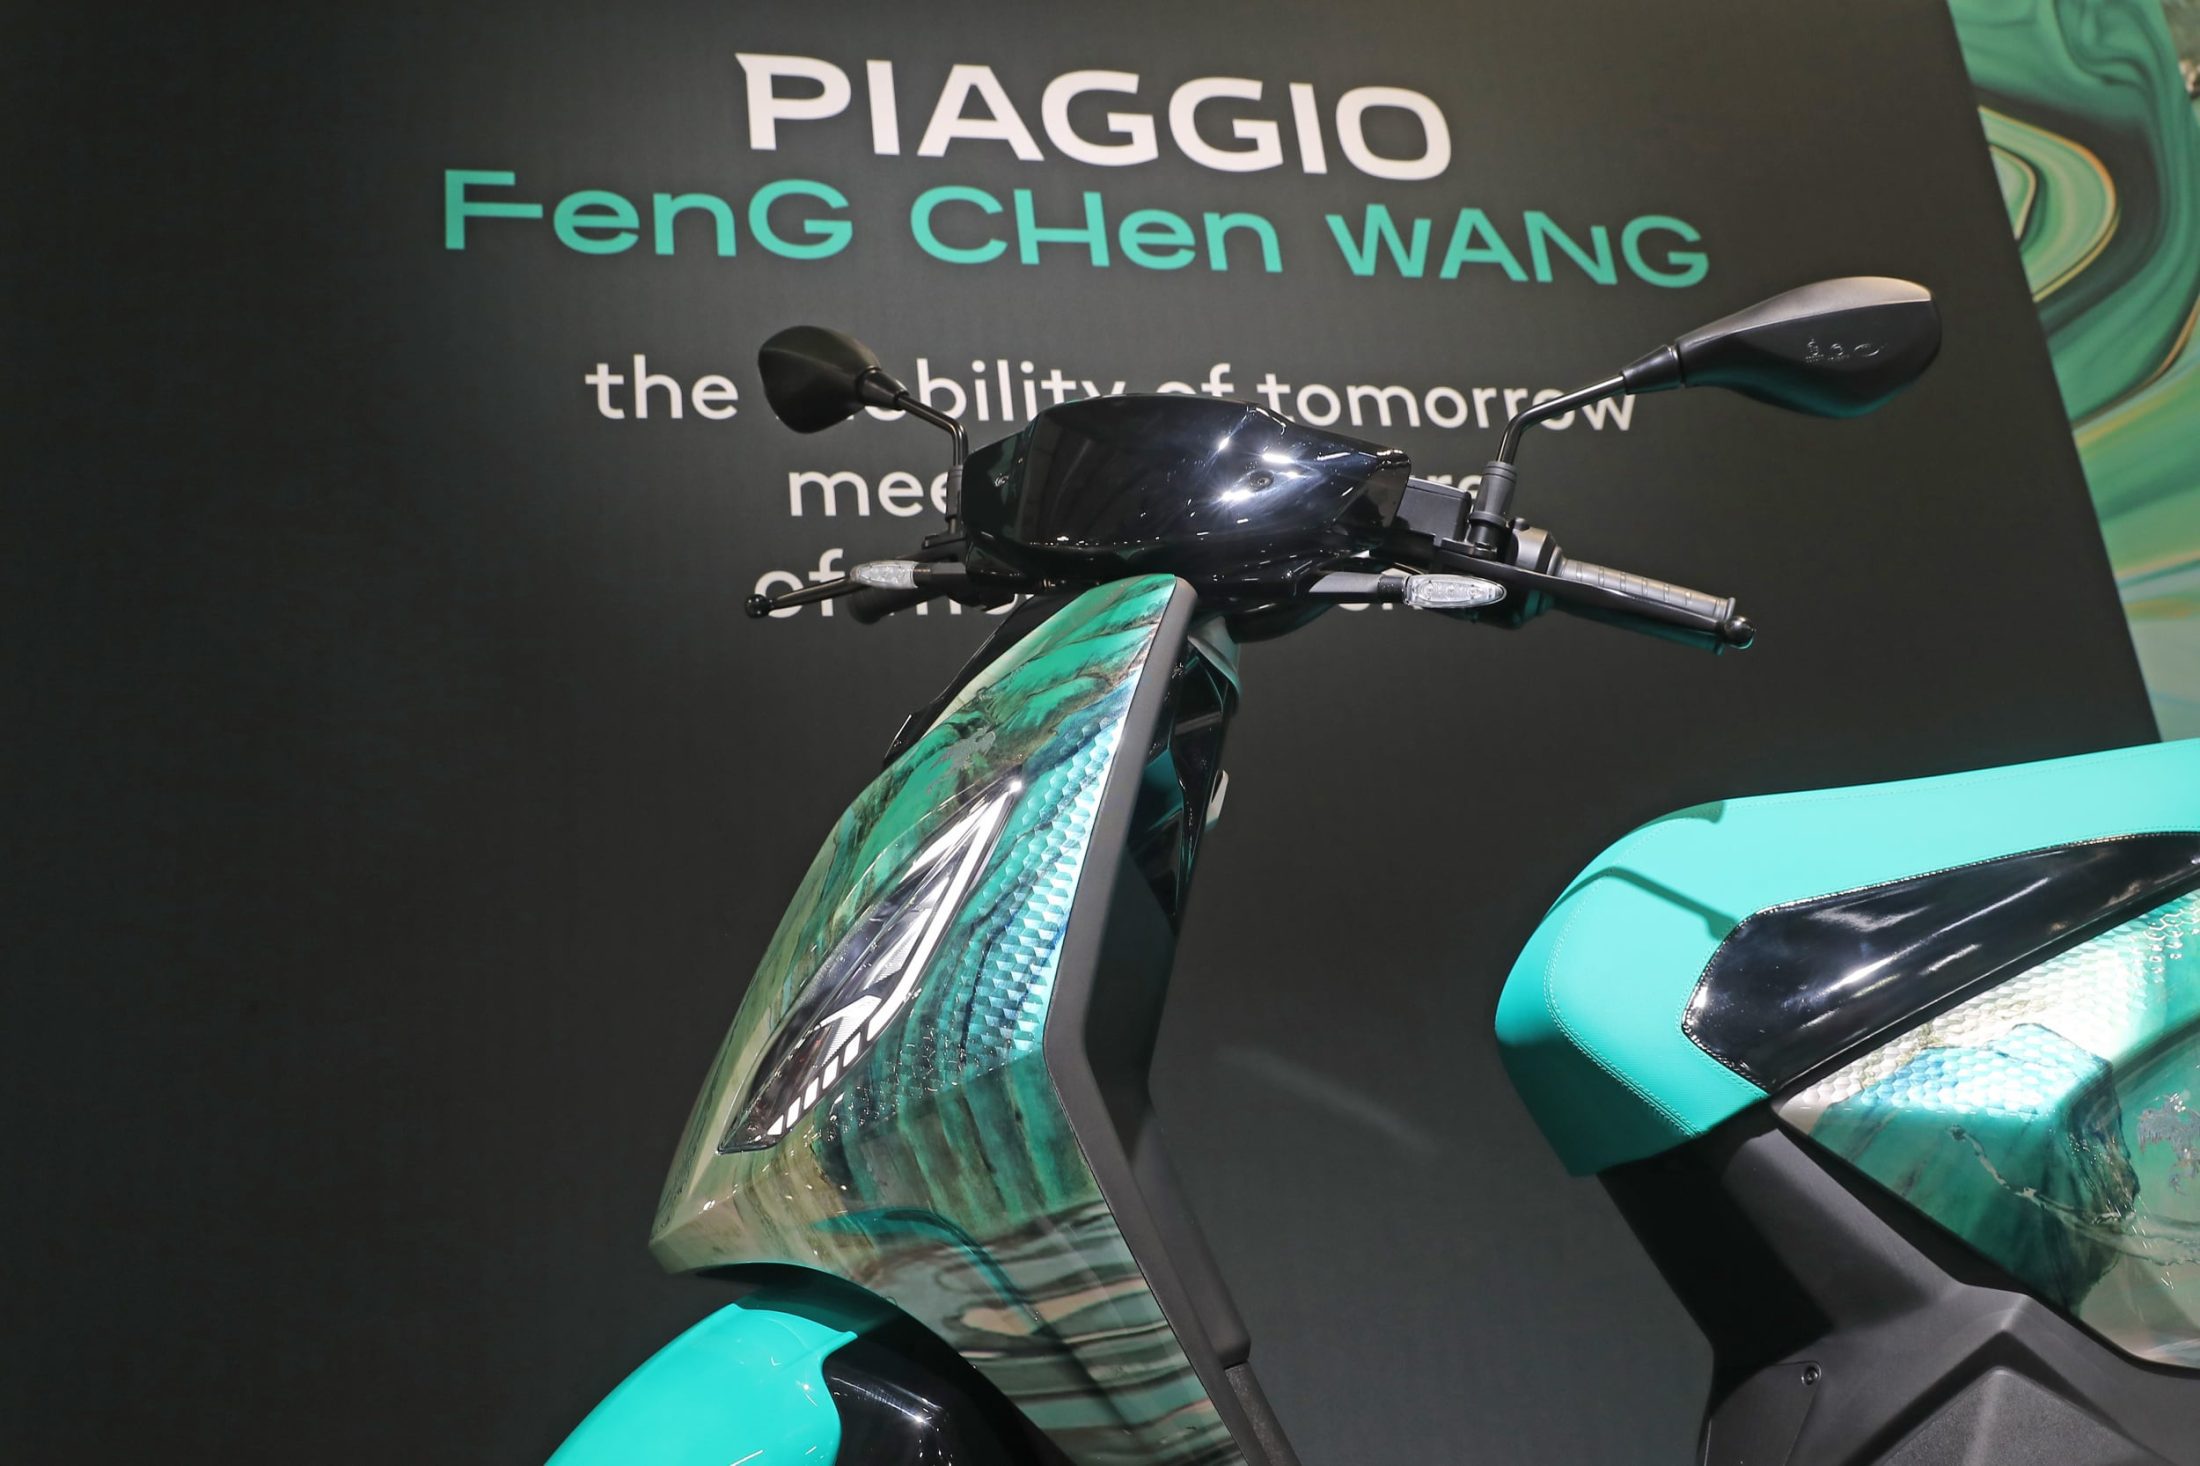 https://e-vehicleinfo.com/global/piaggio-1-fcw-electric-scooter-price-range-and-specifications/